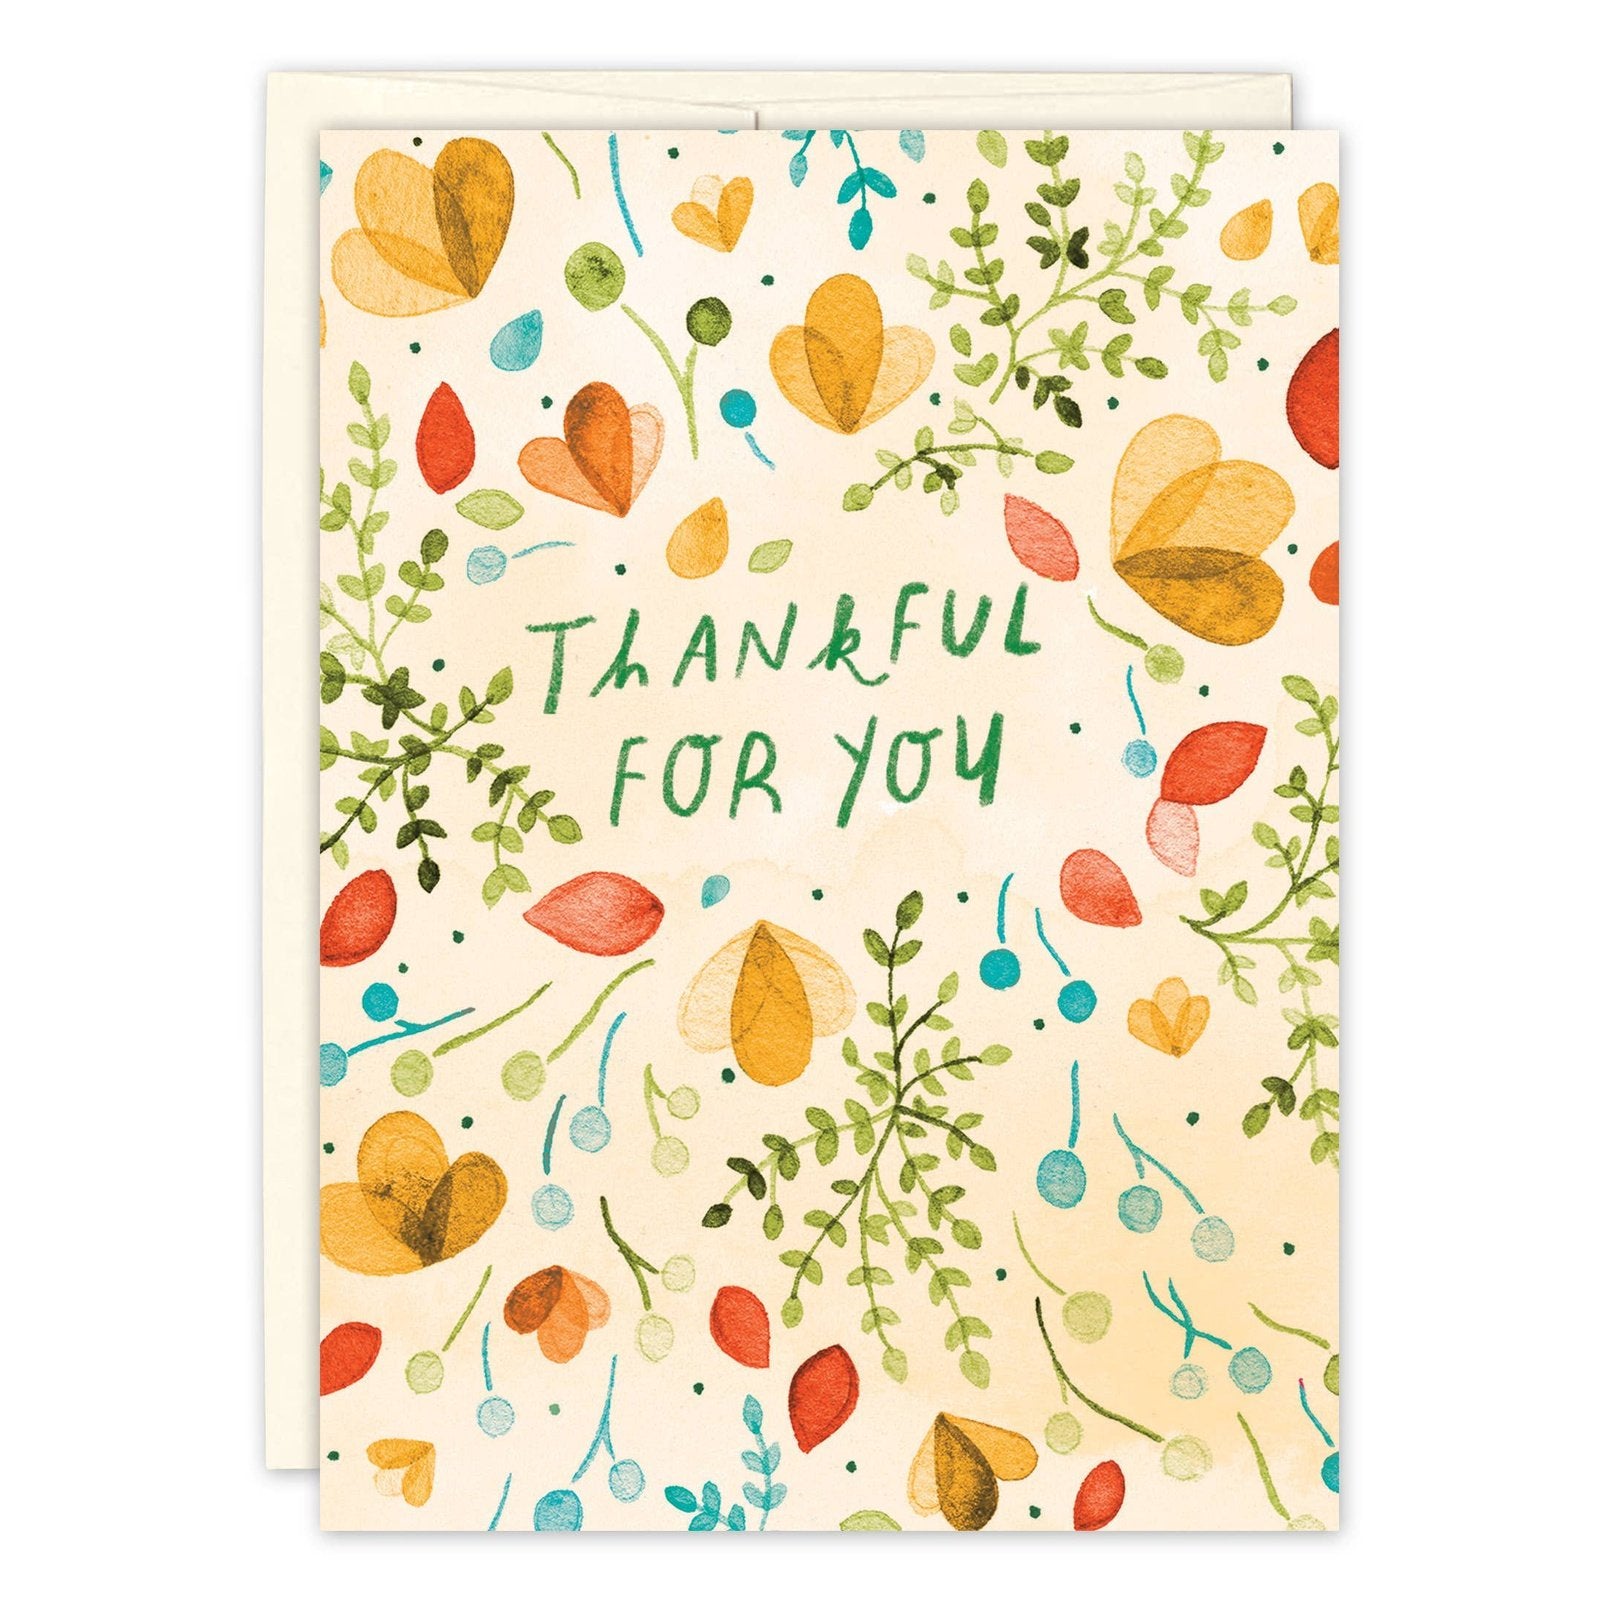 Biely & Shoaf - Thankful For You Card